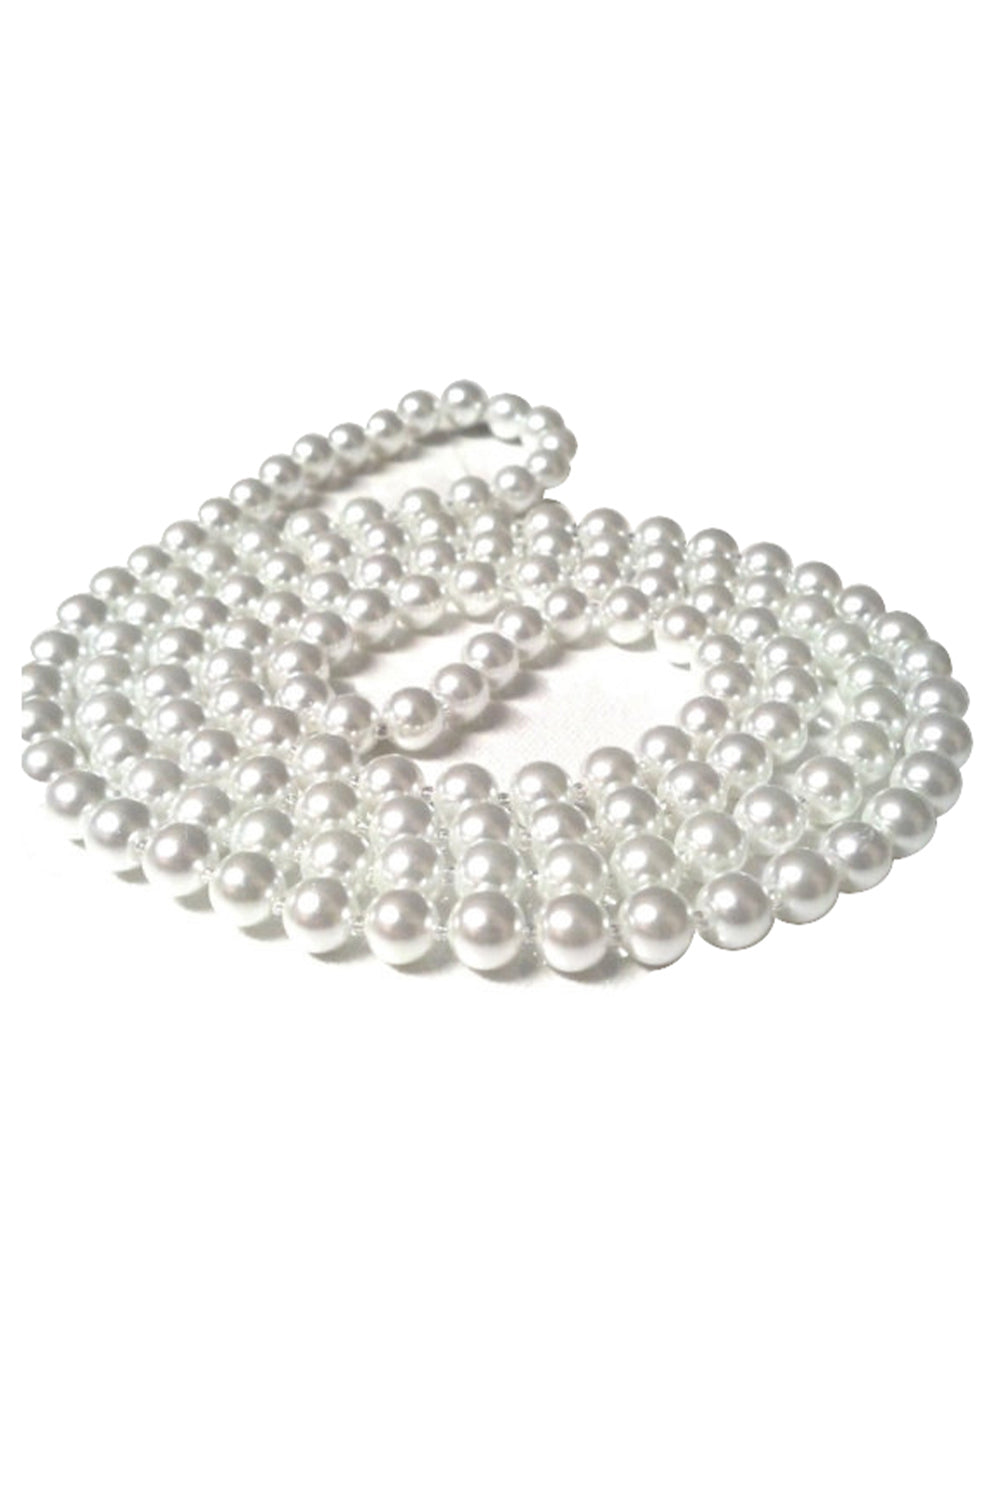 Pearl Beads Necklace (Approx 48 Inches)